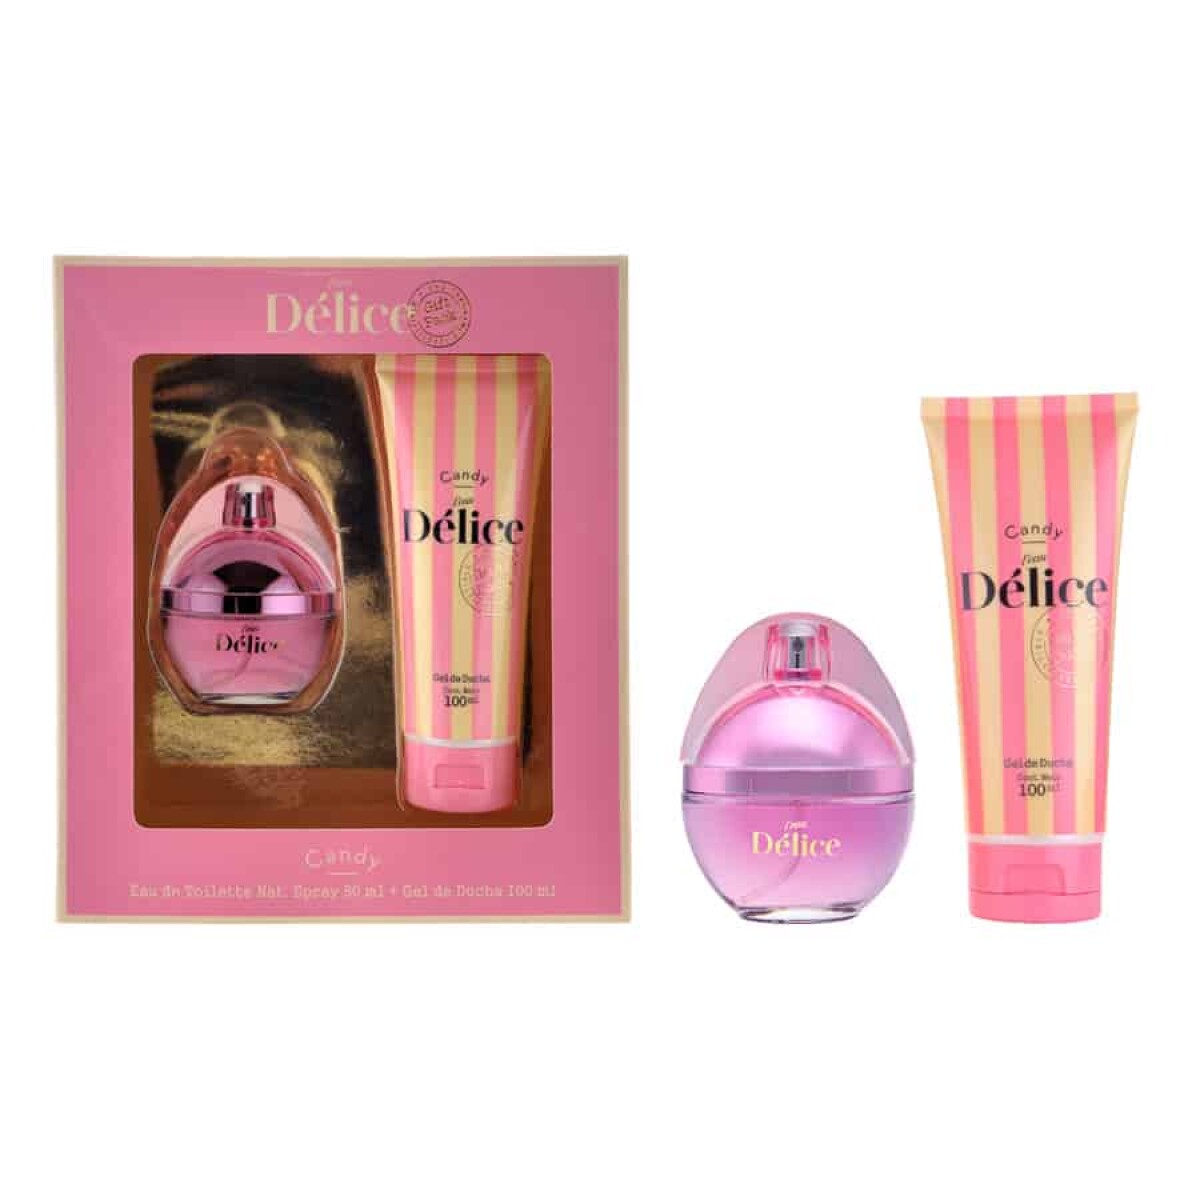 Perfume Delice Cofre Candy Edt 50 ml 